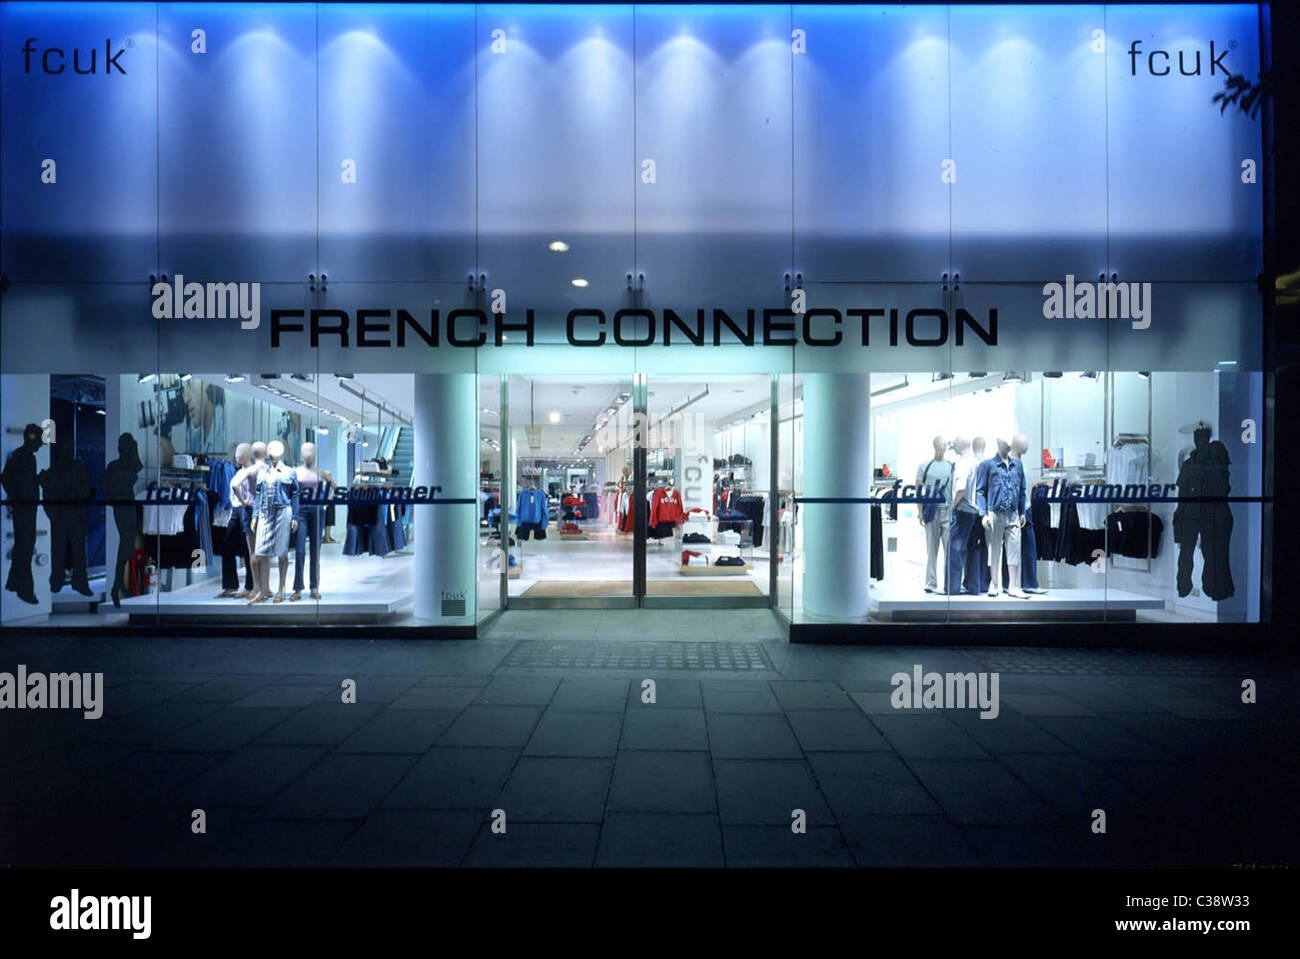 The French Connection store on Oxford Street, pictured at night. Stock Photo